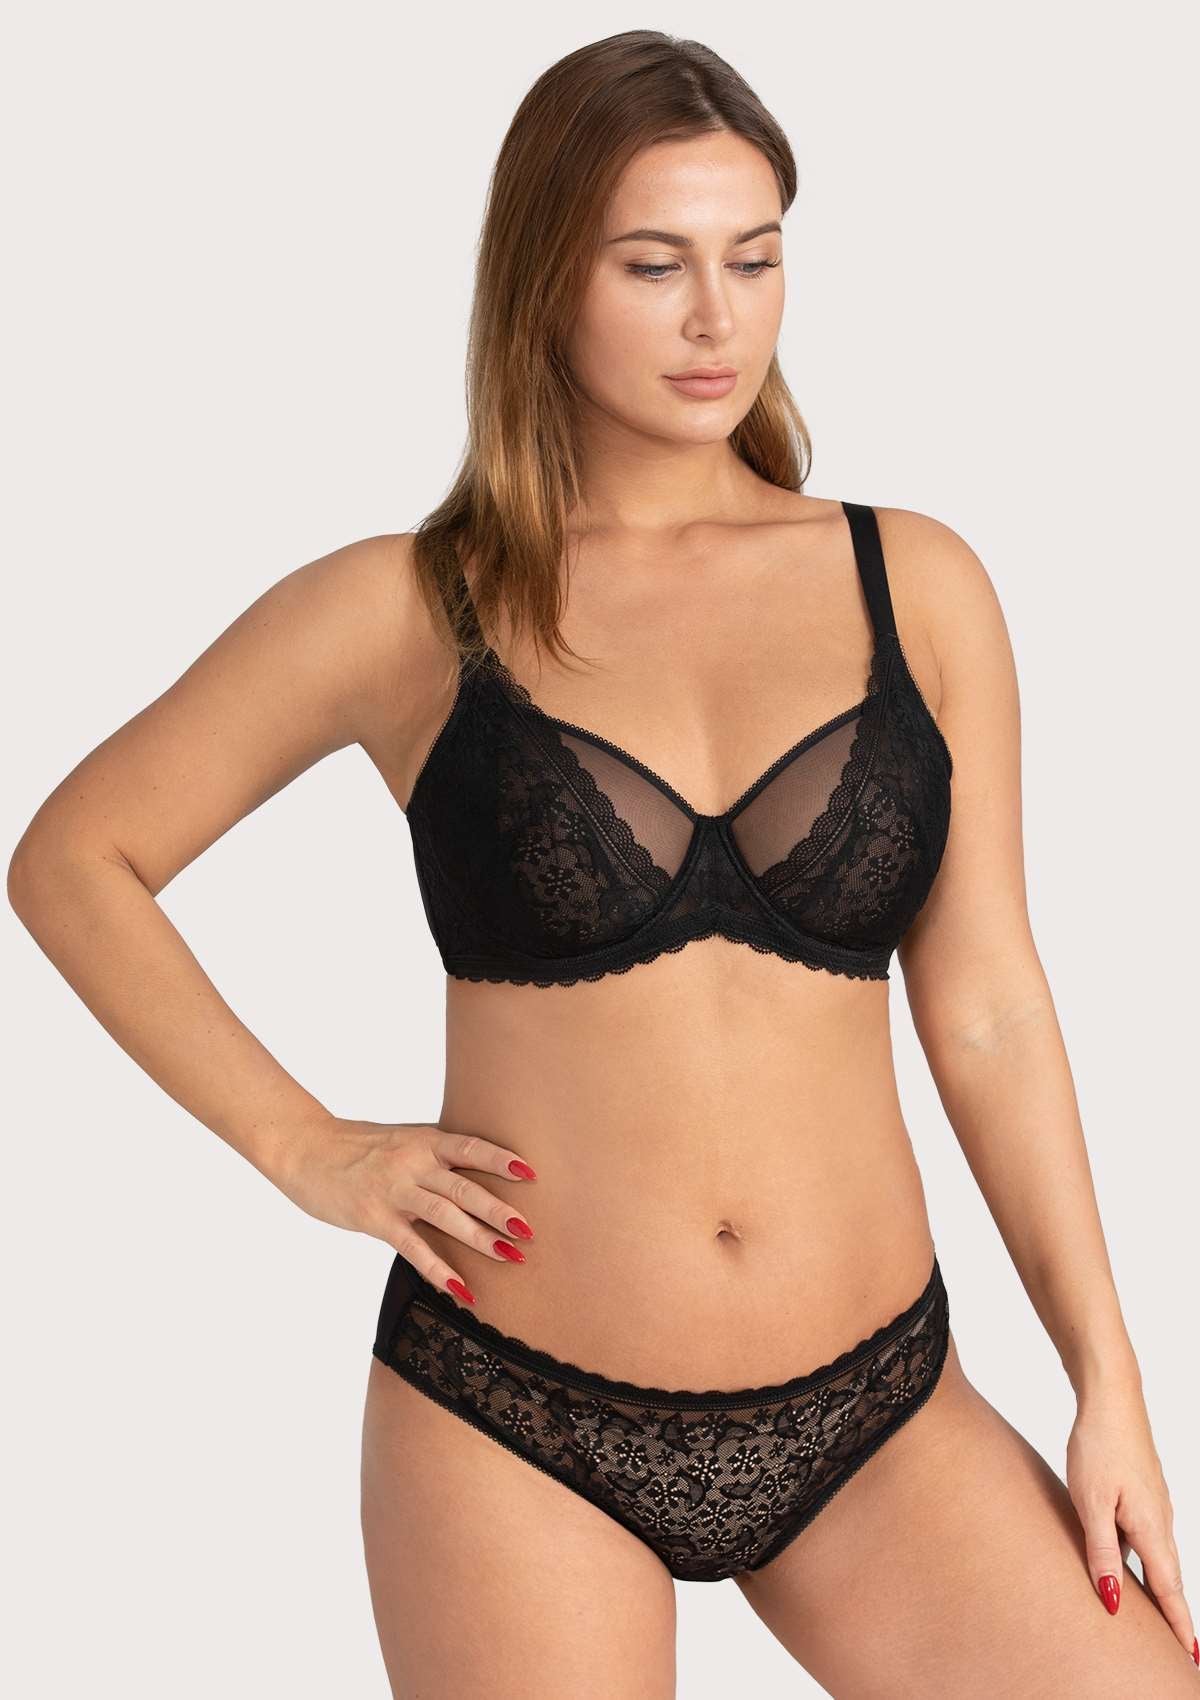 HSIA Anemone Lace Bra And Panties: Back Support Wired Bra - Black / 36 / D